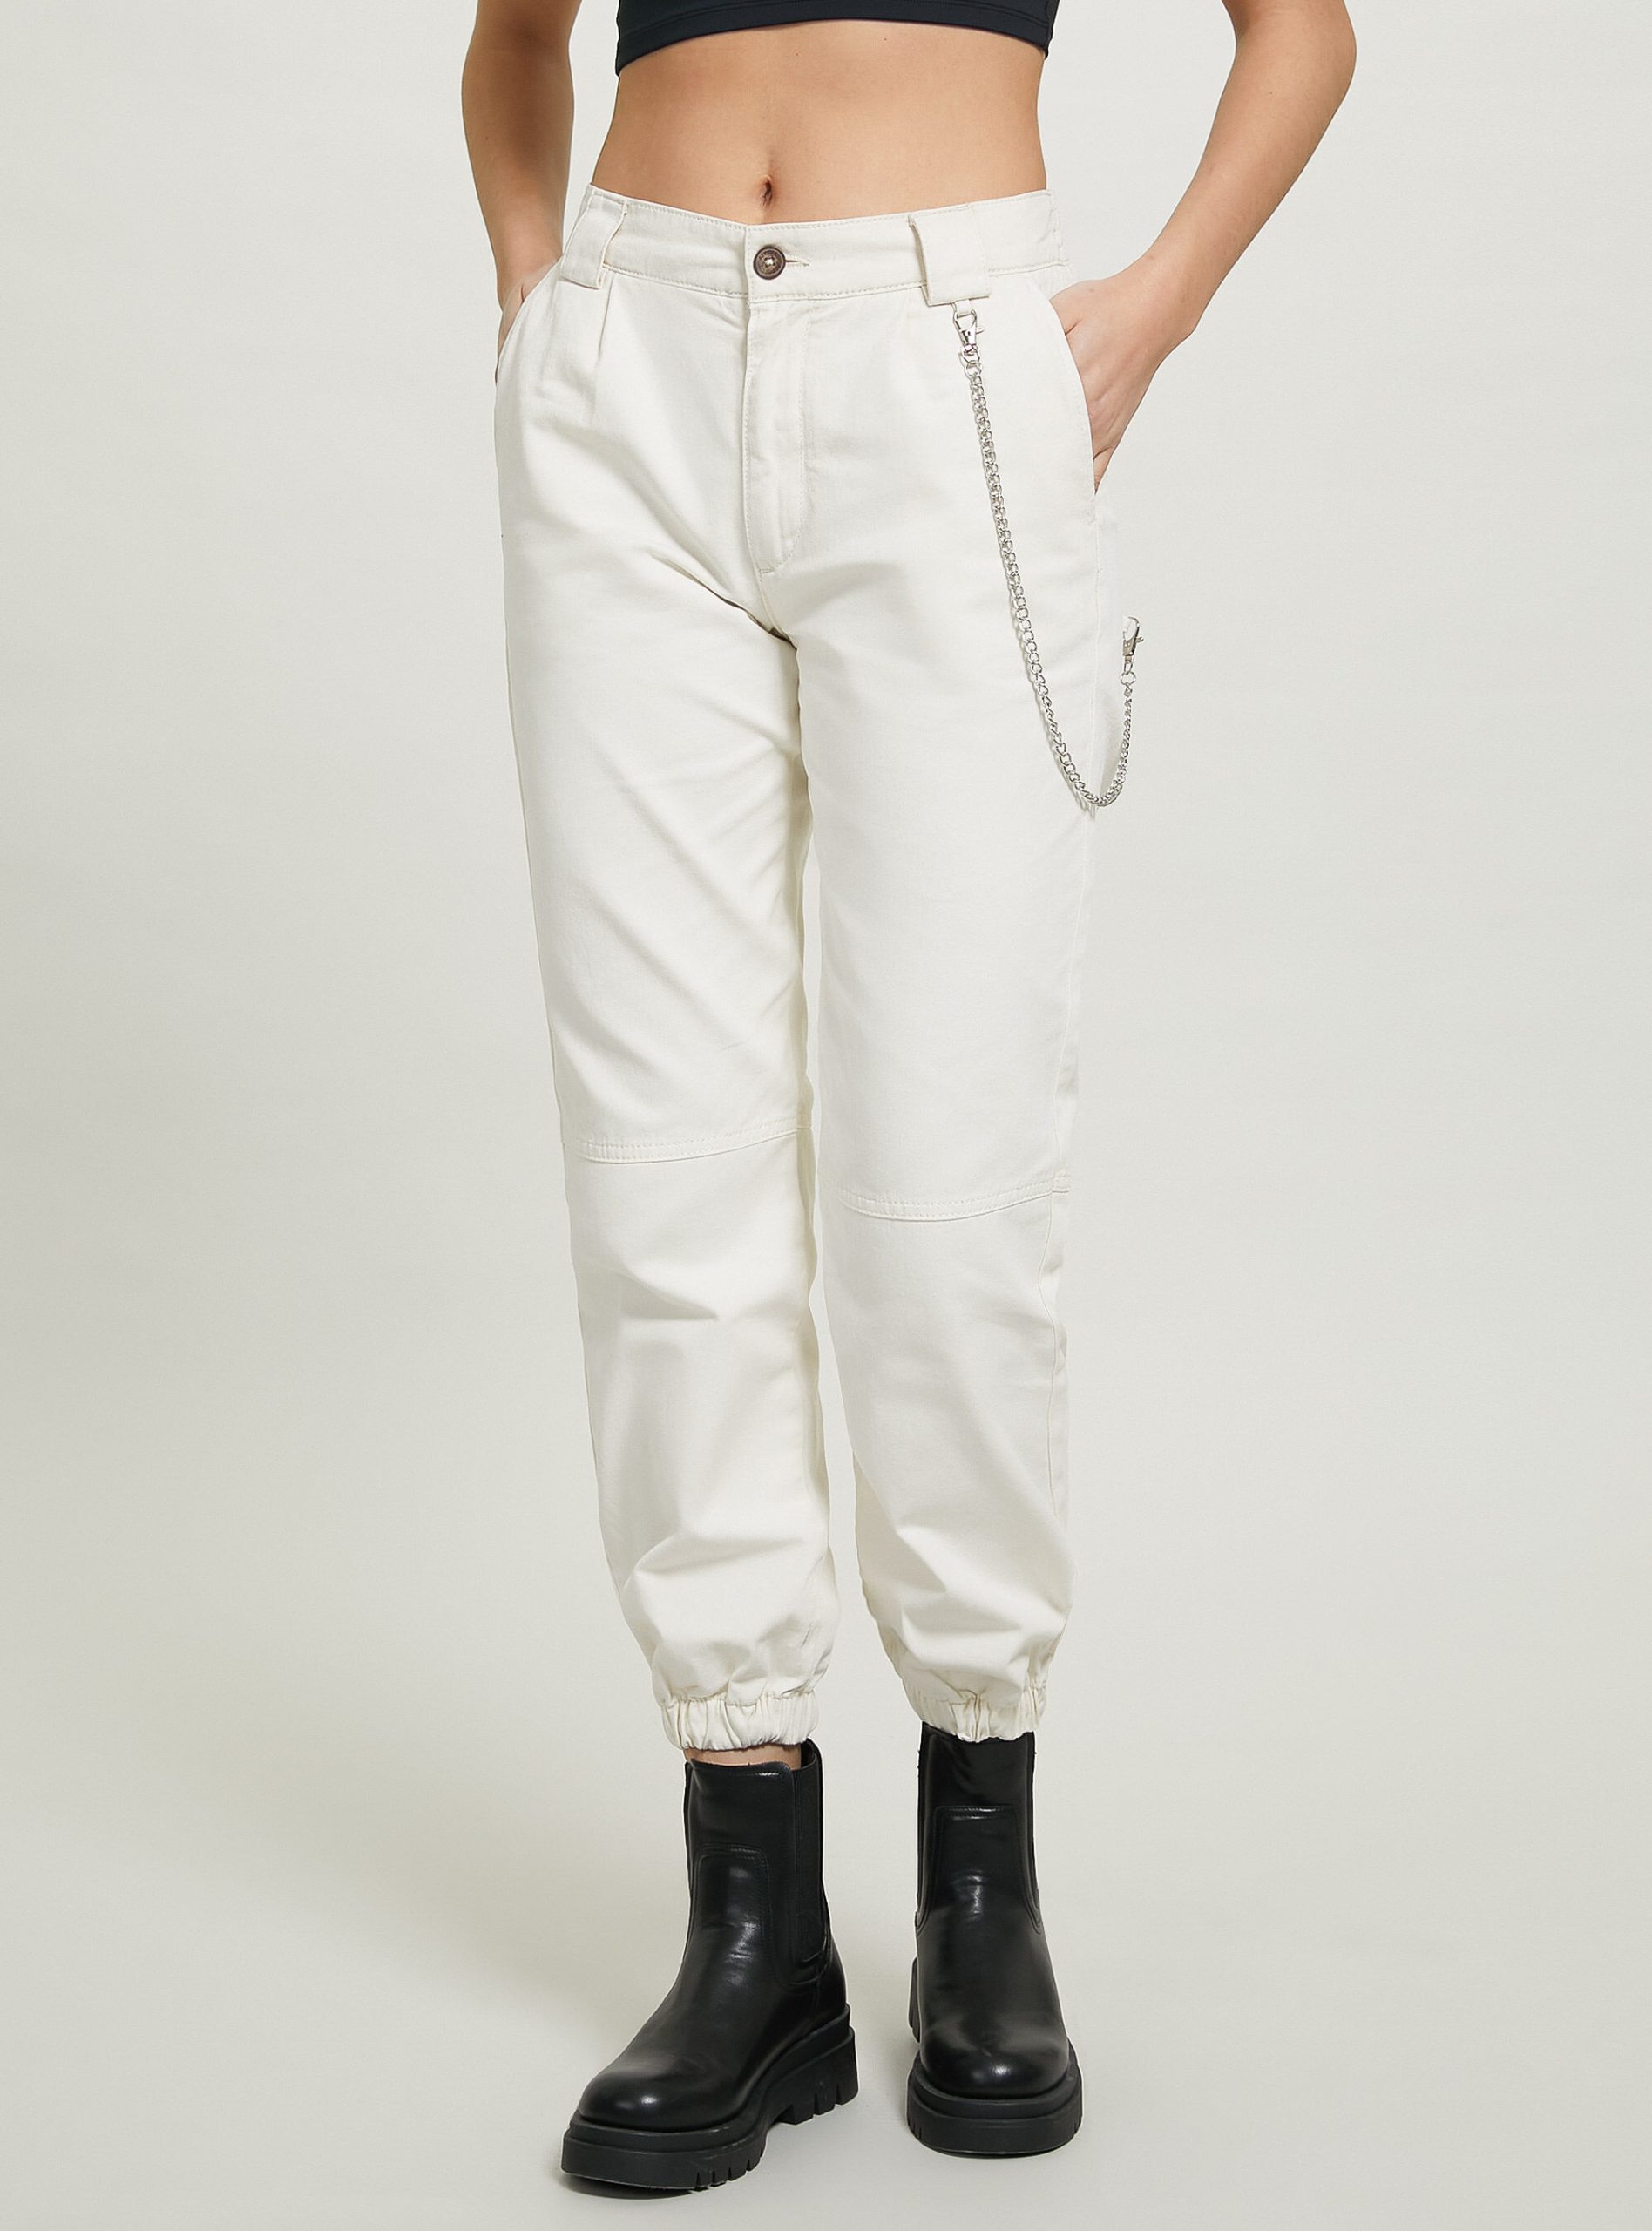 Promotion Frauen Wh1 Off White Hosen Jogger Trousers With Chain Alcott – 1